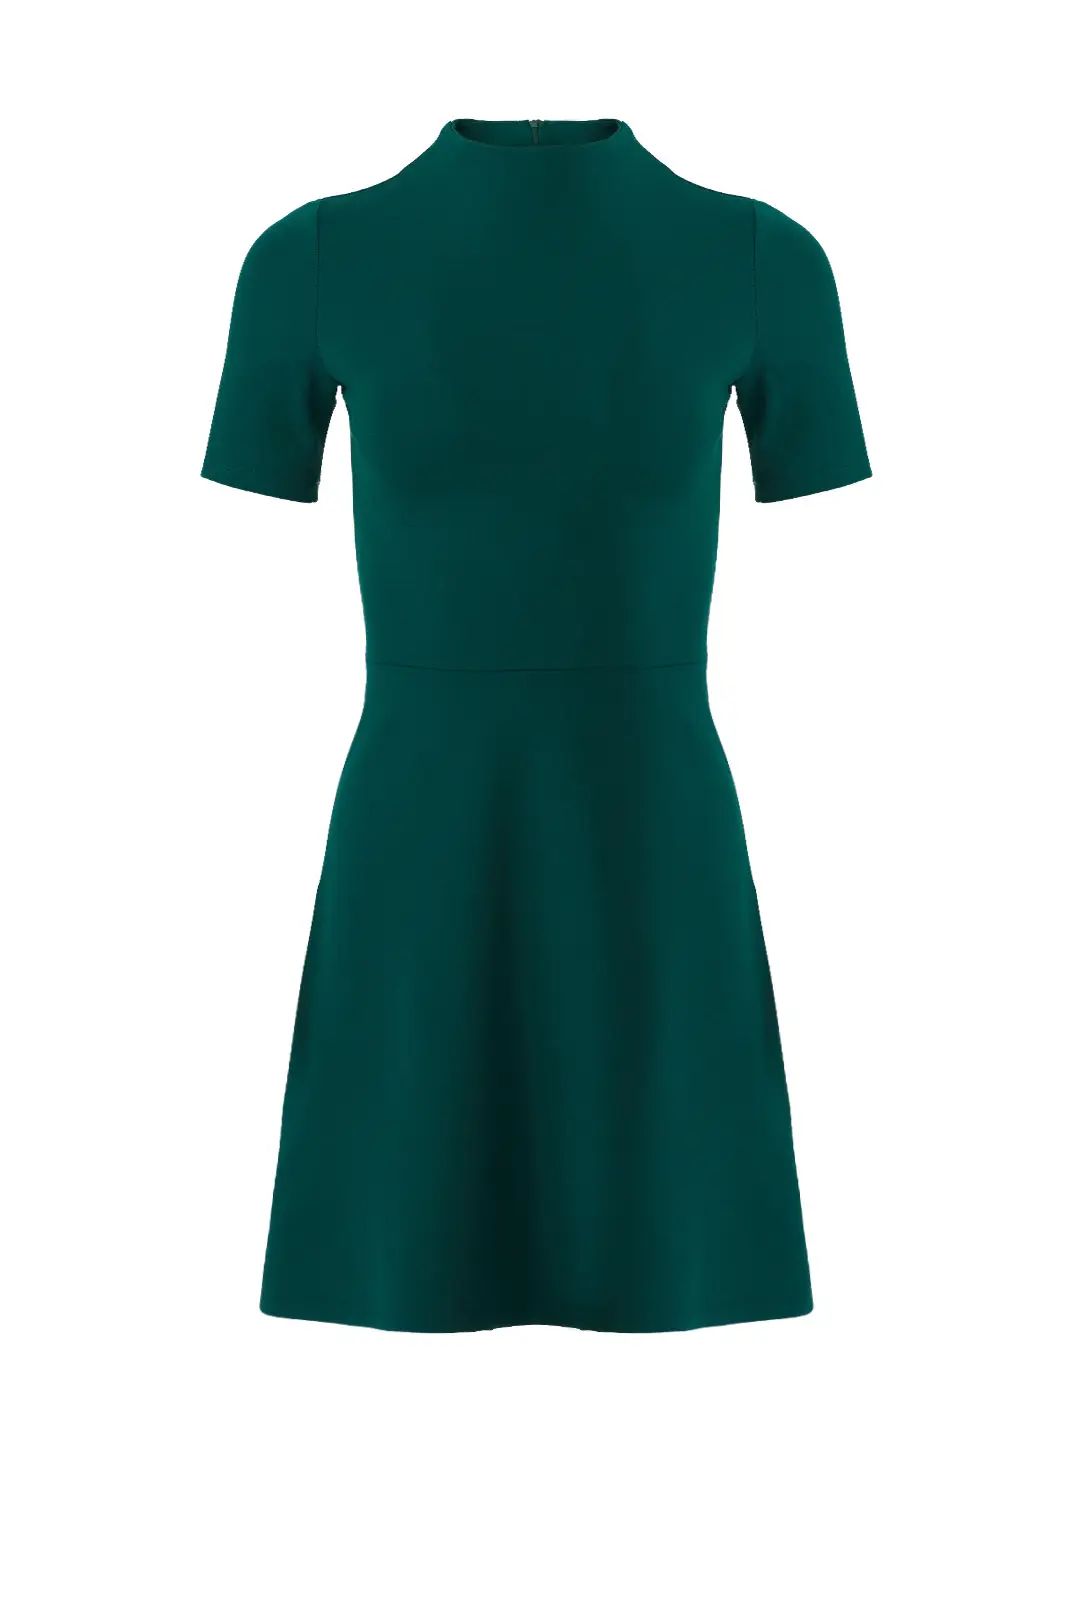 Slate & Willow Green Mock Neck Flare Dress | Rent The Runway